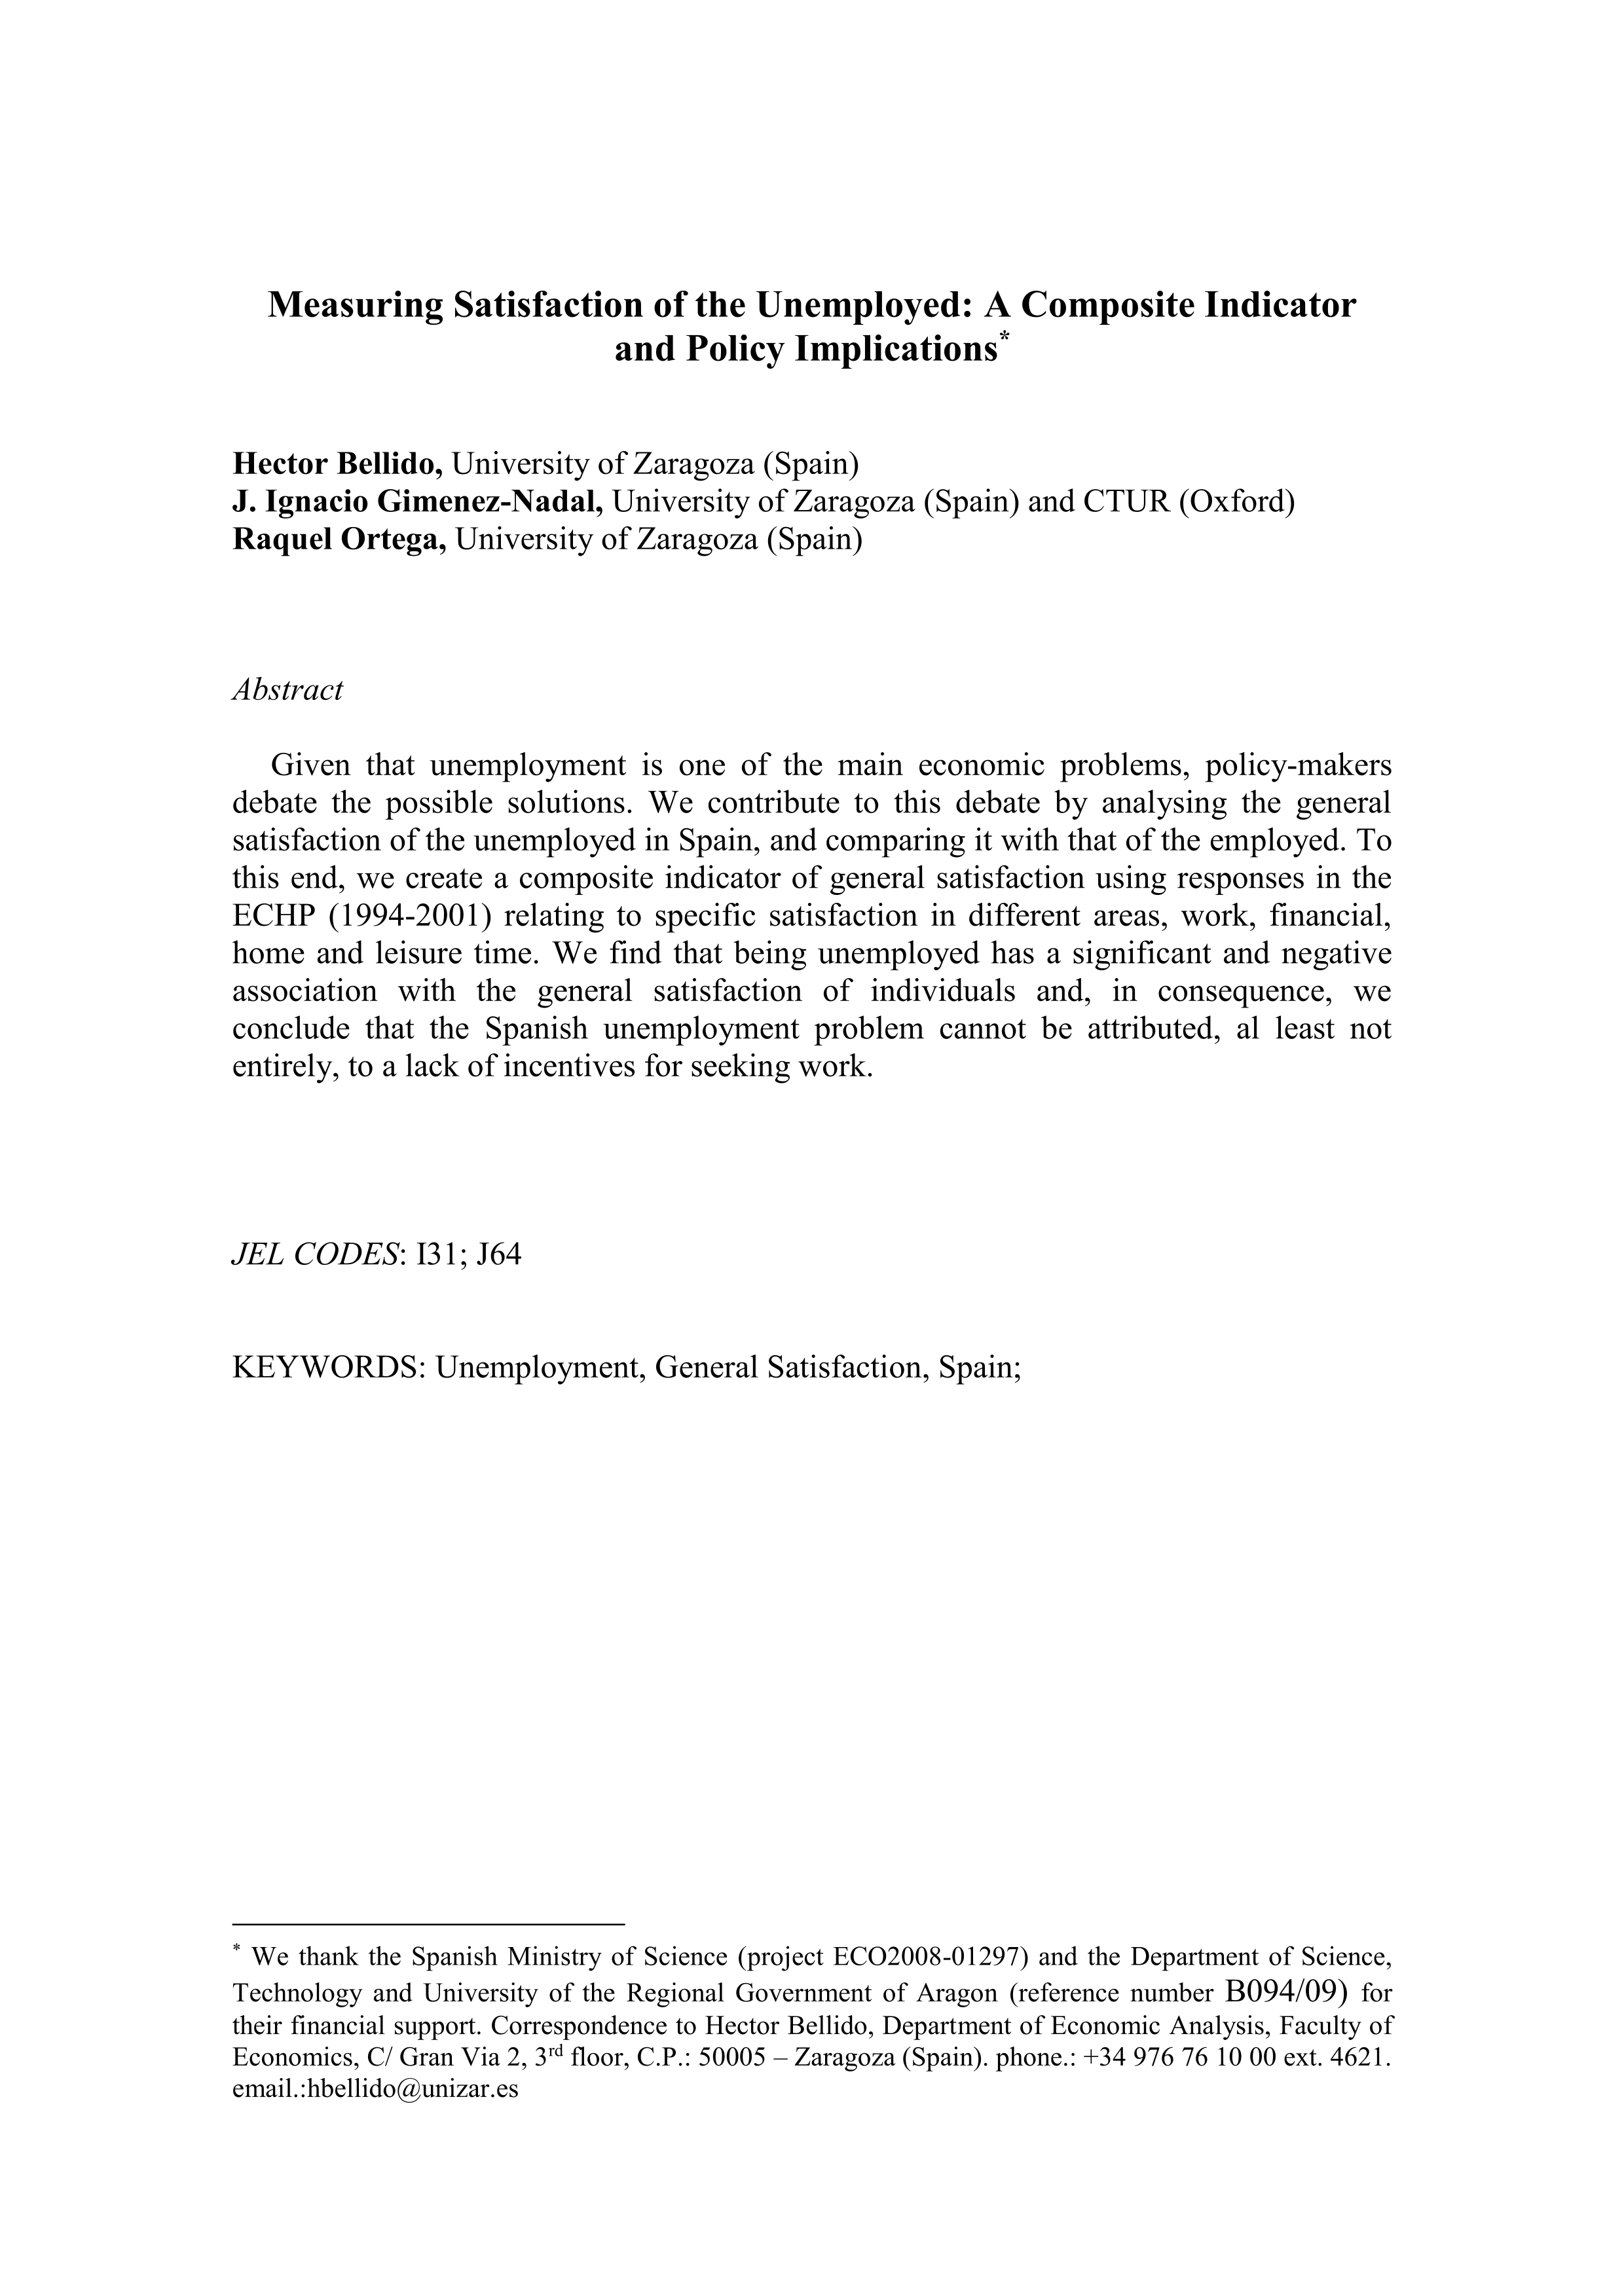 Measuring satisfaction of the unemployed: A composite indicator and policy implications